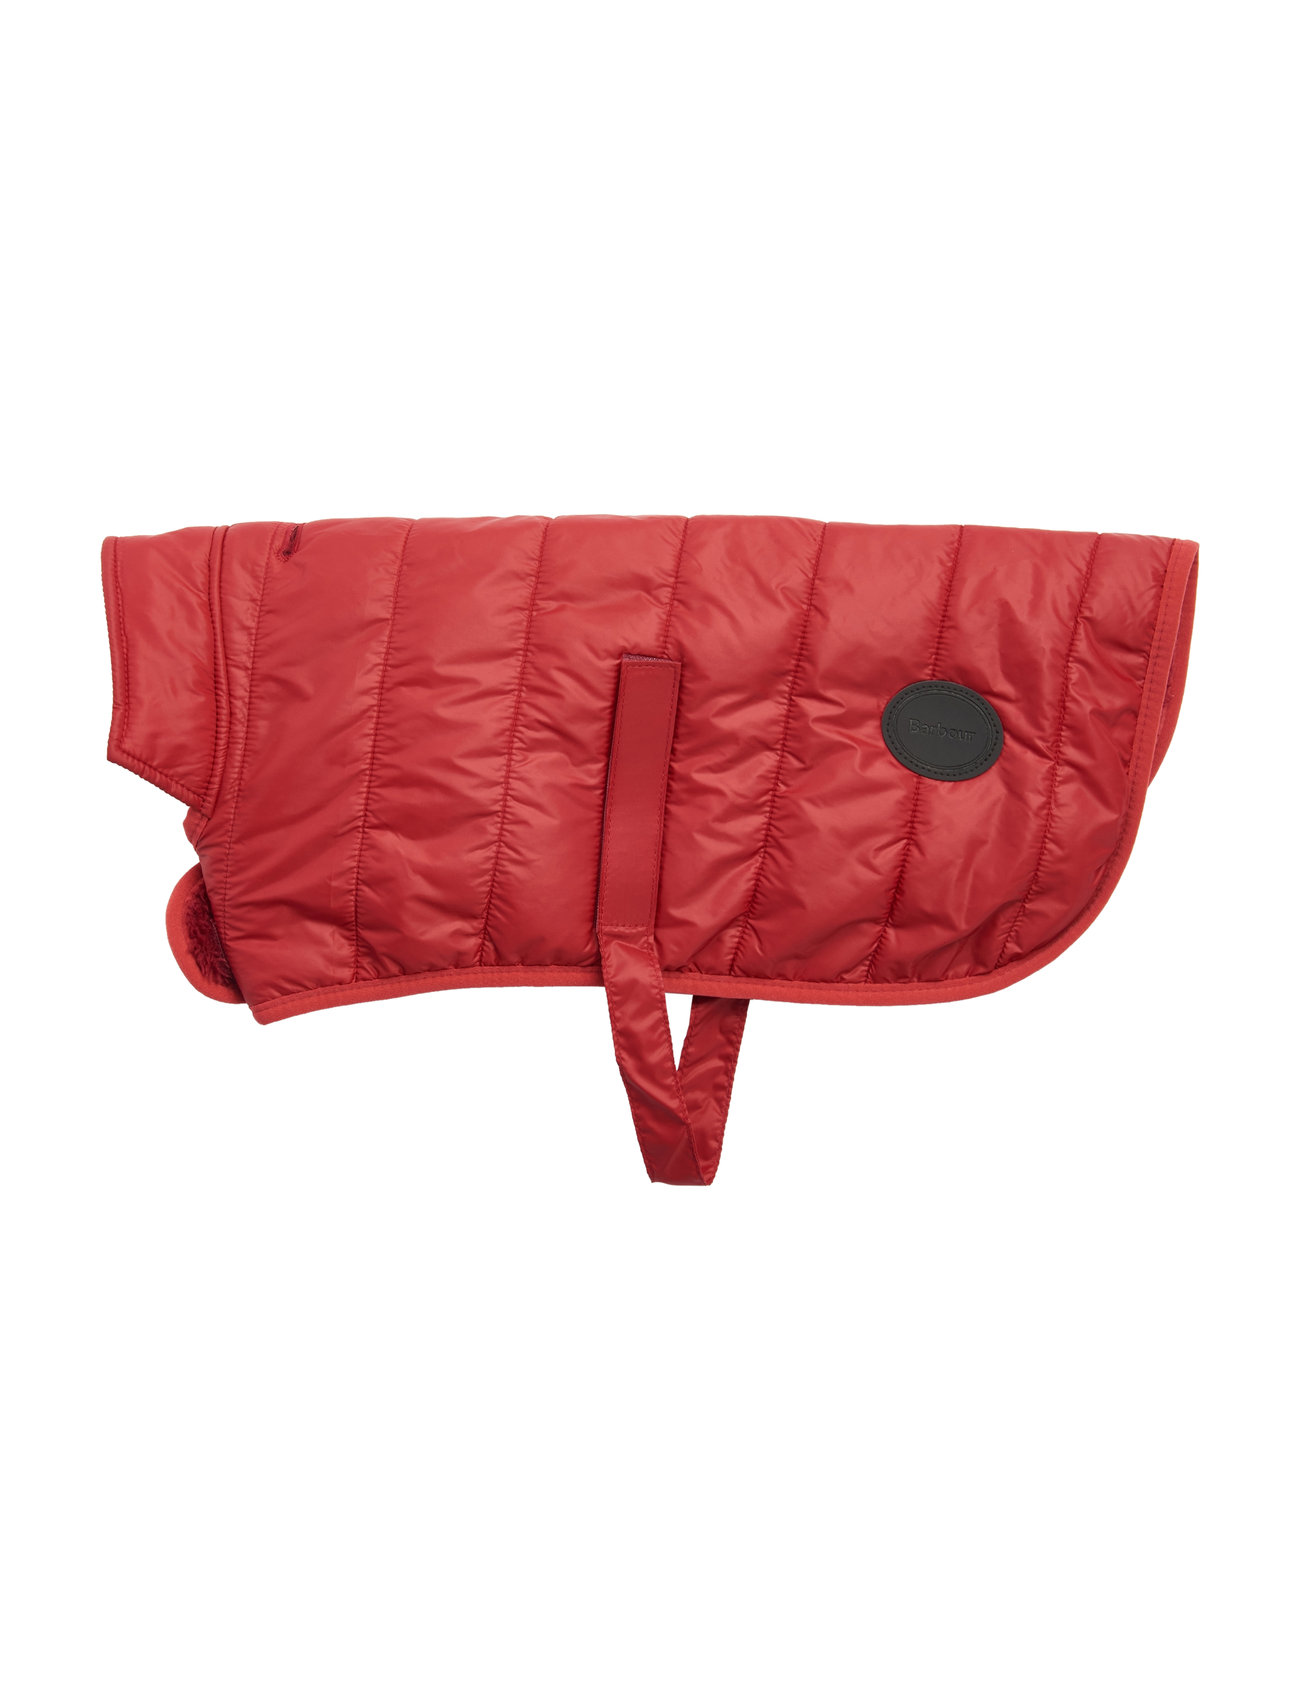 Barbour Quilt Dog Coat Red-S Home Pets Dog Clothes Red Barbour